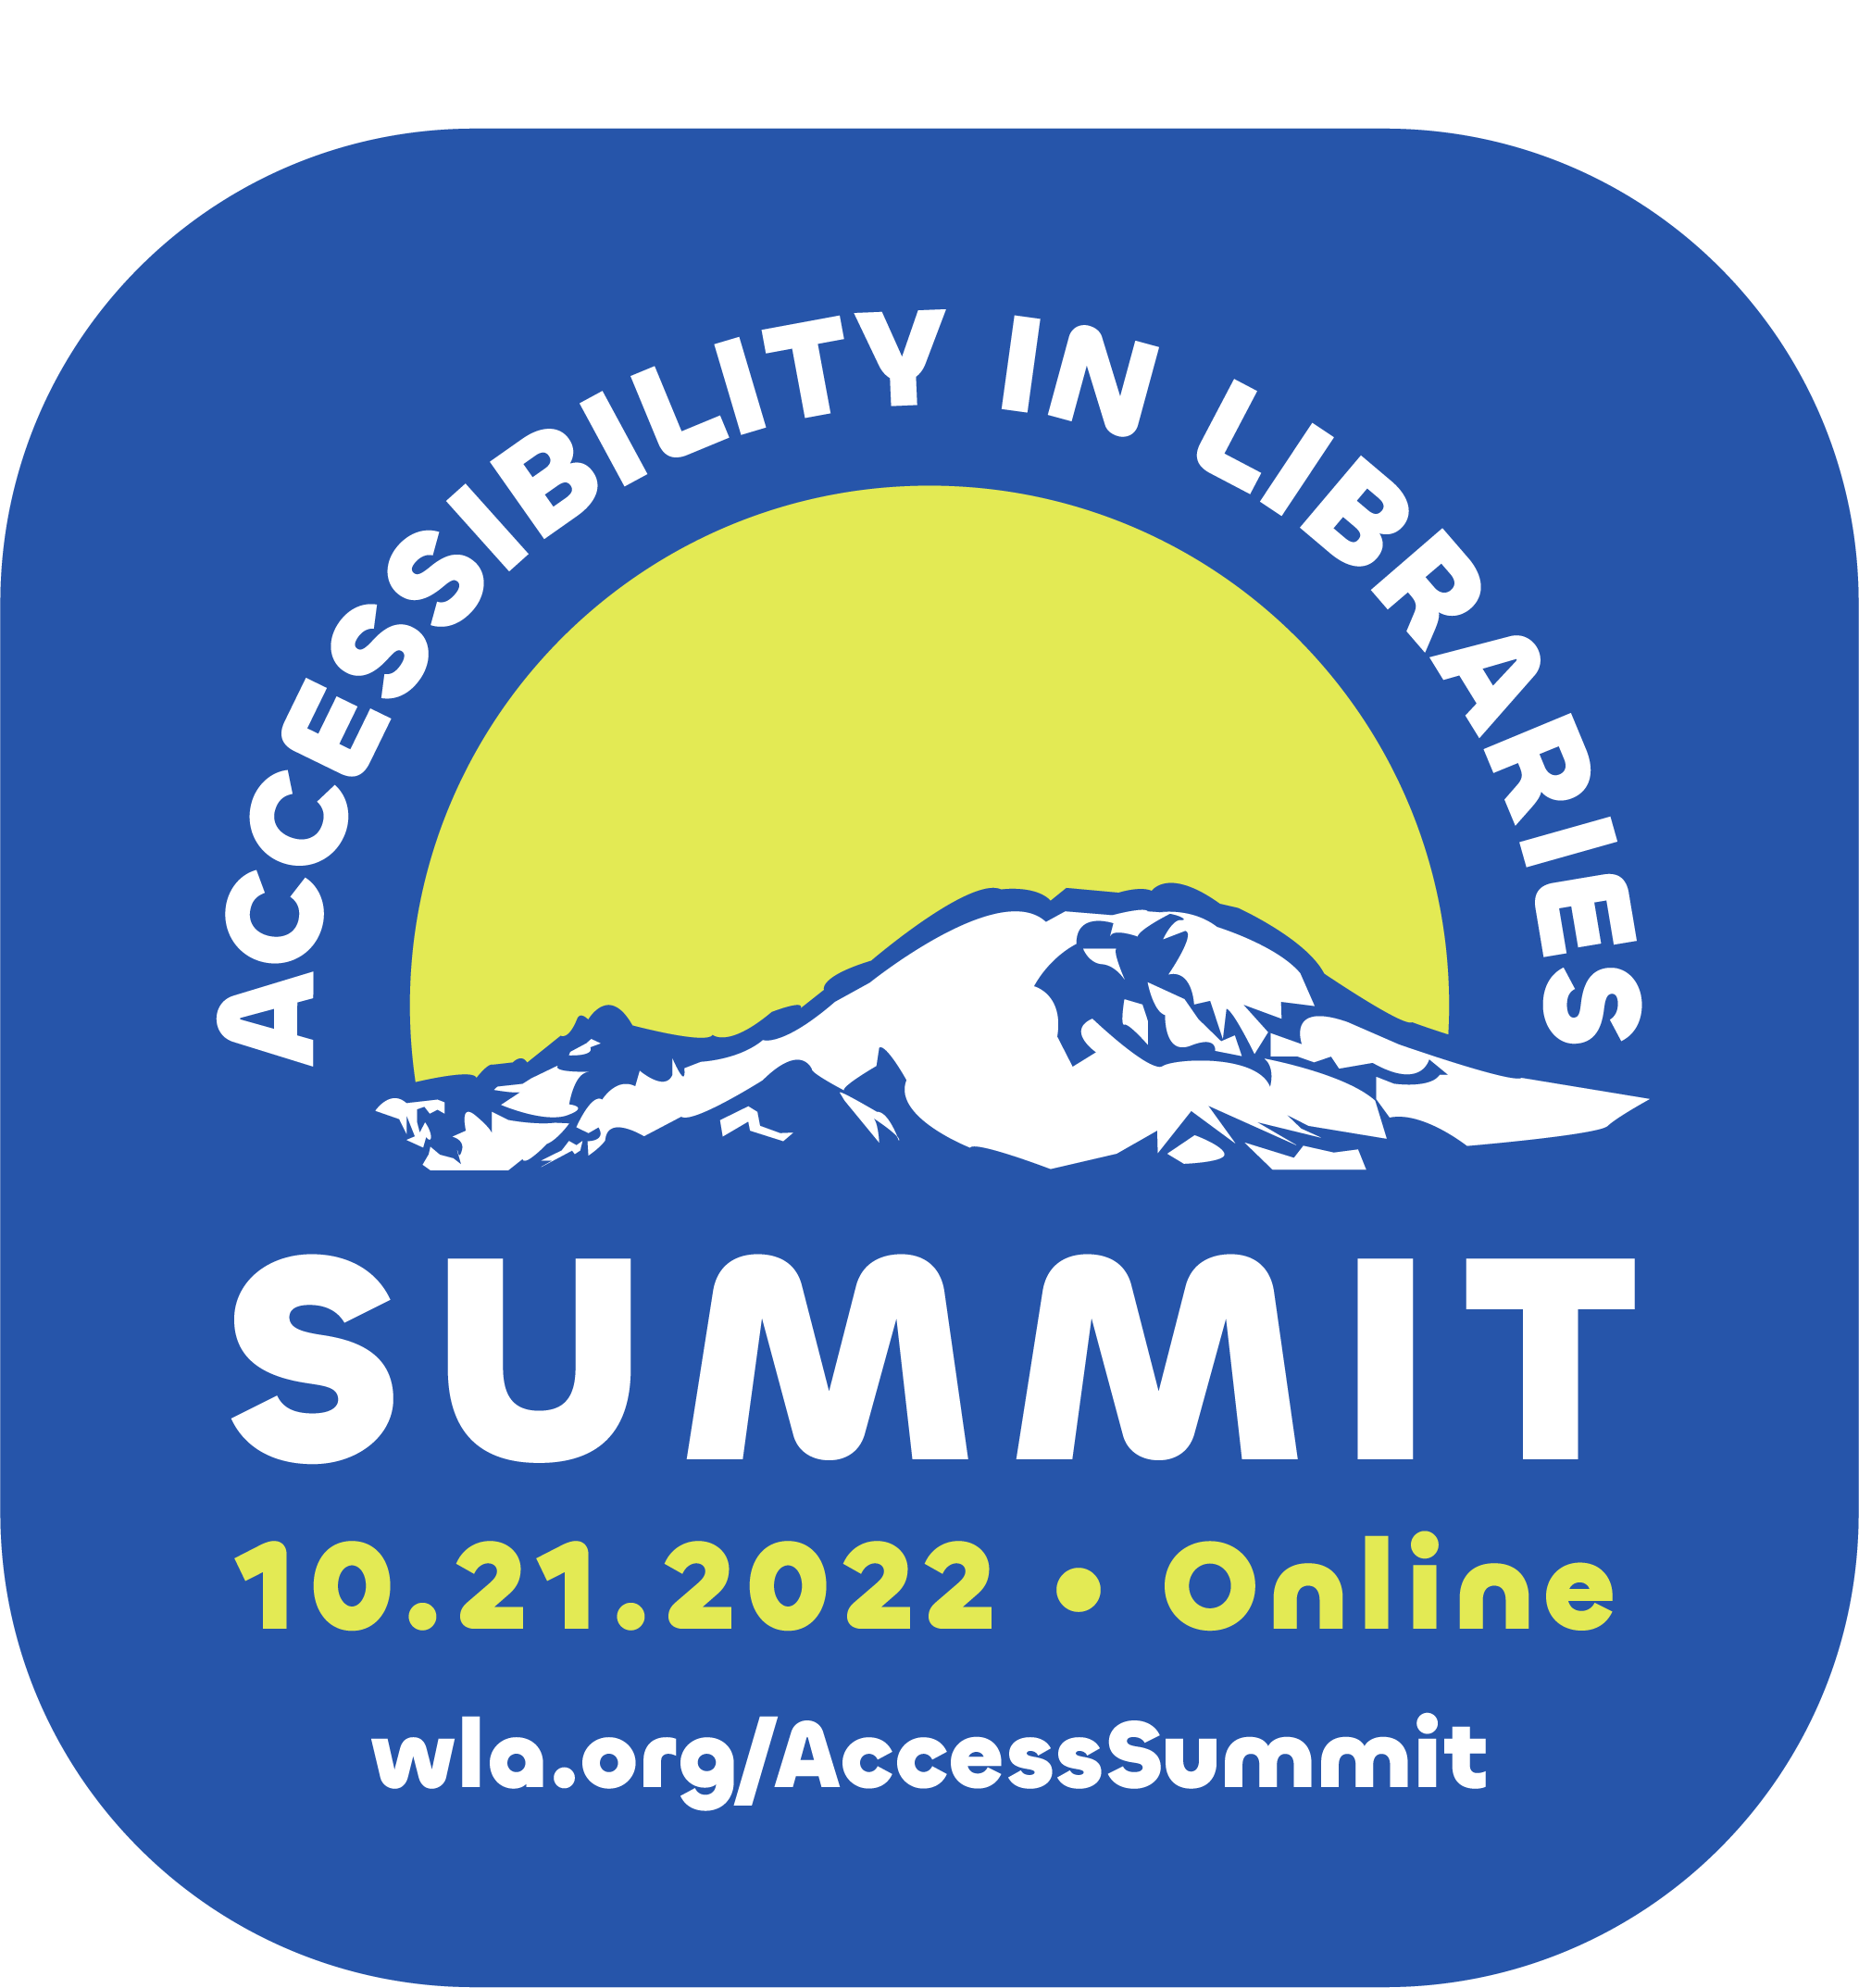 WLA Accessibility in Libraries Logo